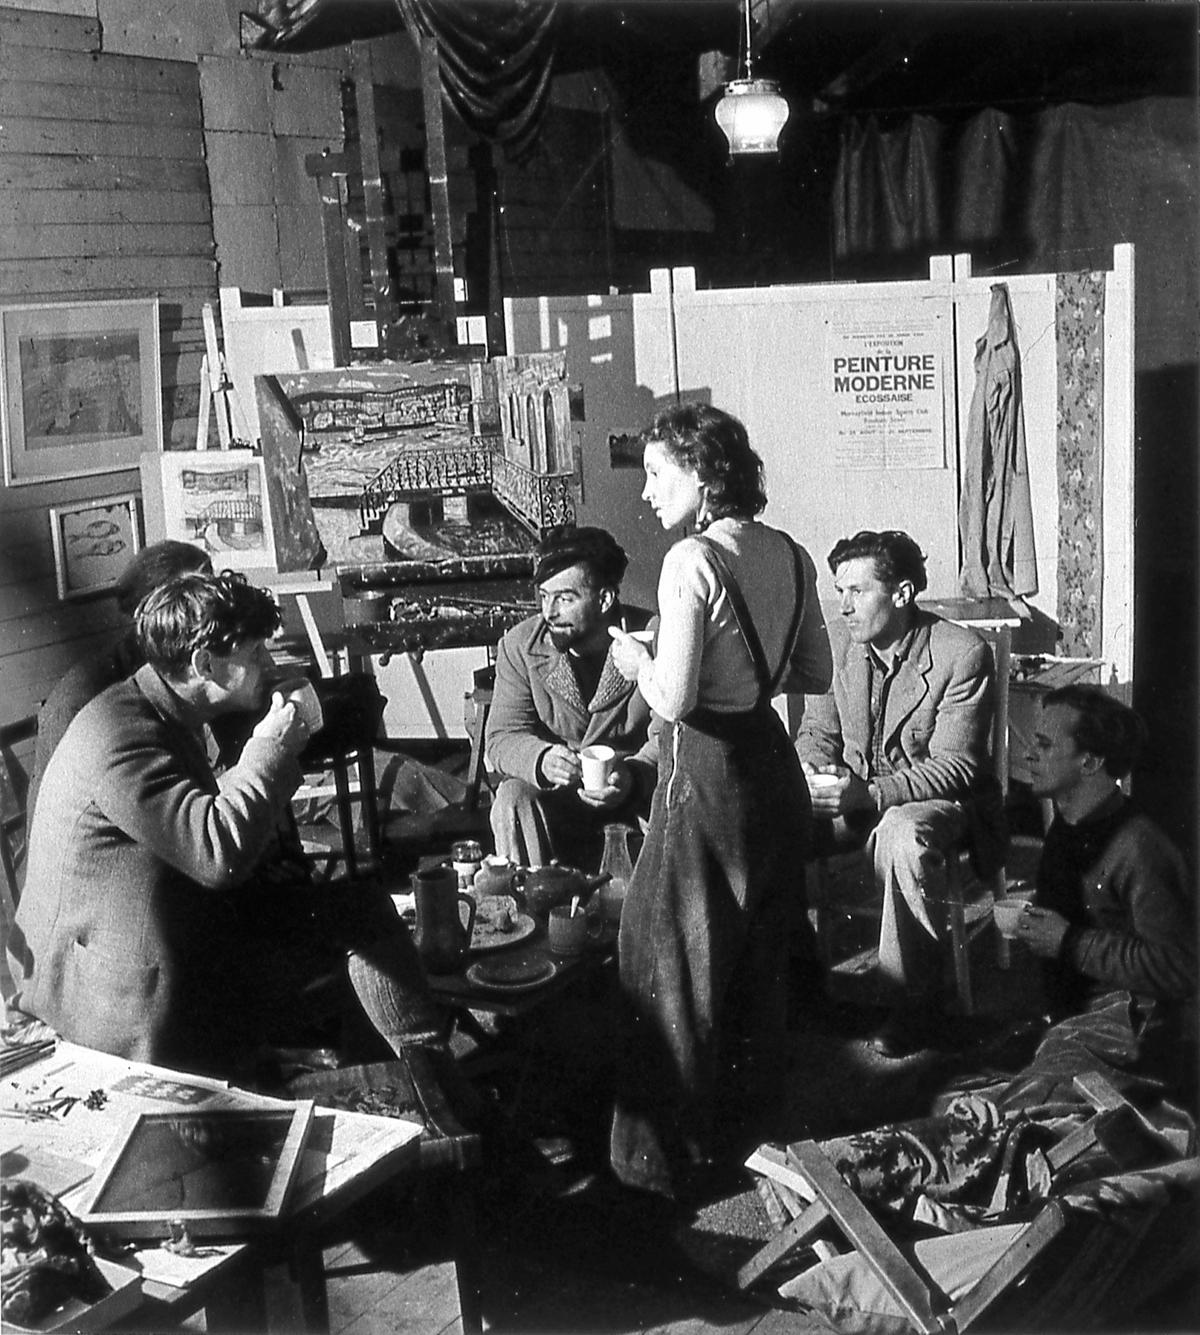 Wilhelmina Barns-Graham at a meeting of the Crypt Group in 1947 

Image: Central Office of Information, courtesy of Wilhelmina Barns-Graham Trust